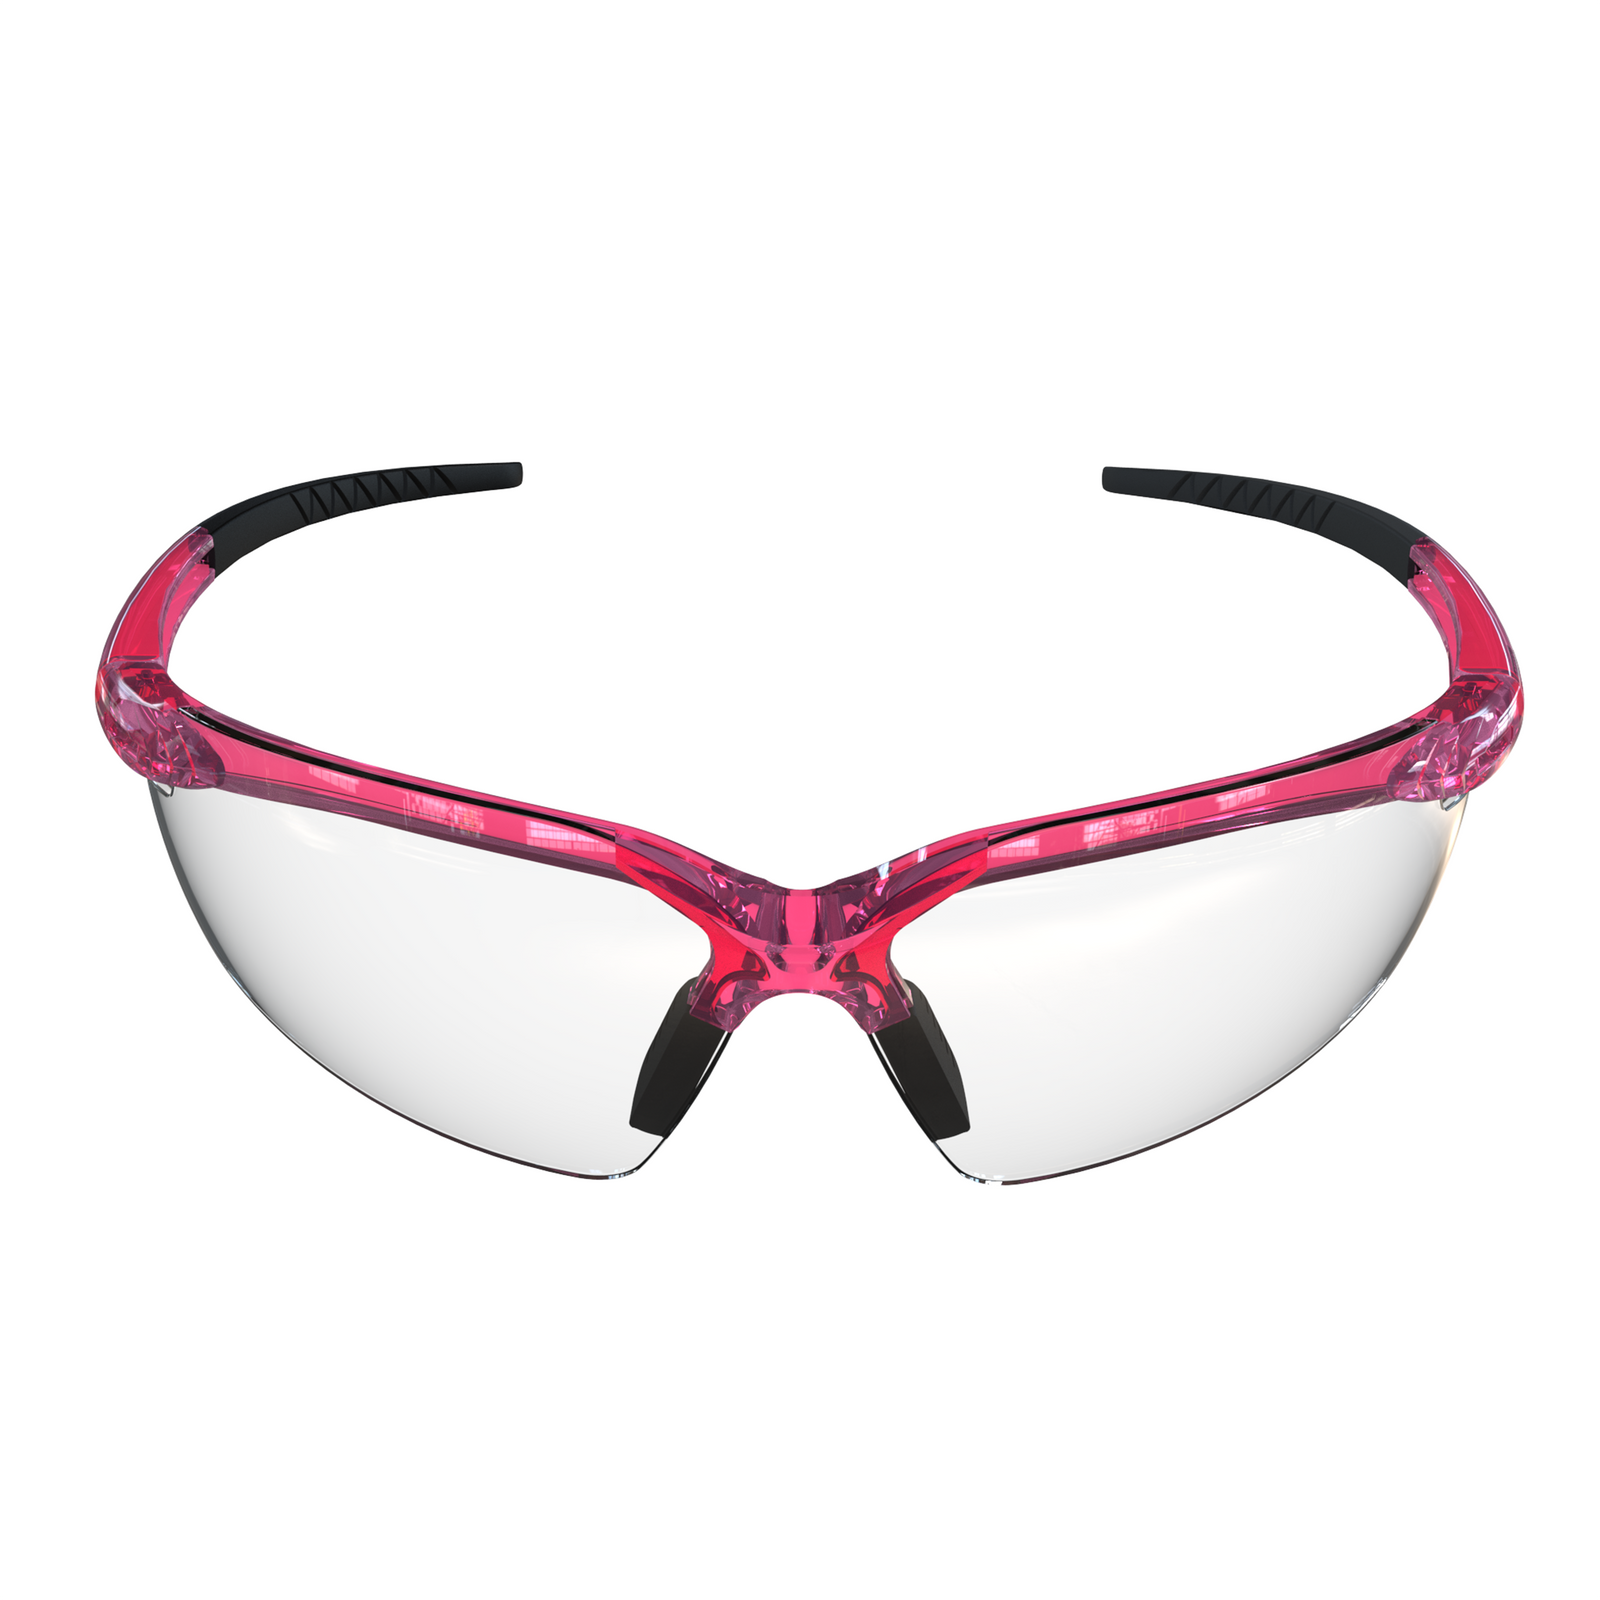 Hi impact safety glasses with a modern contemporary design